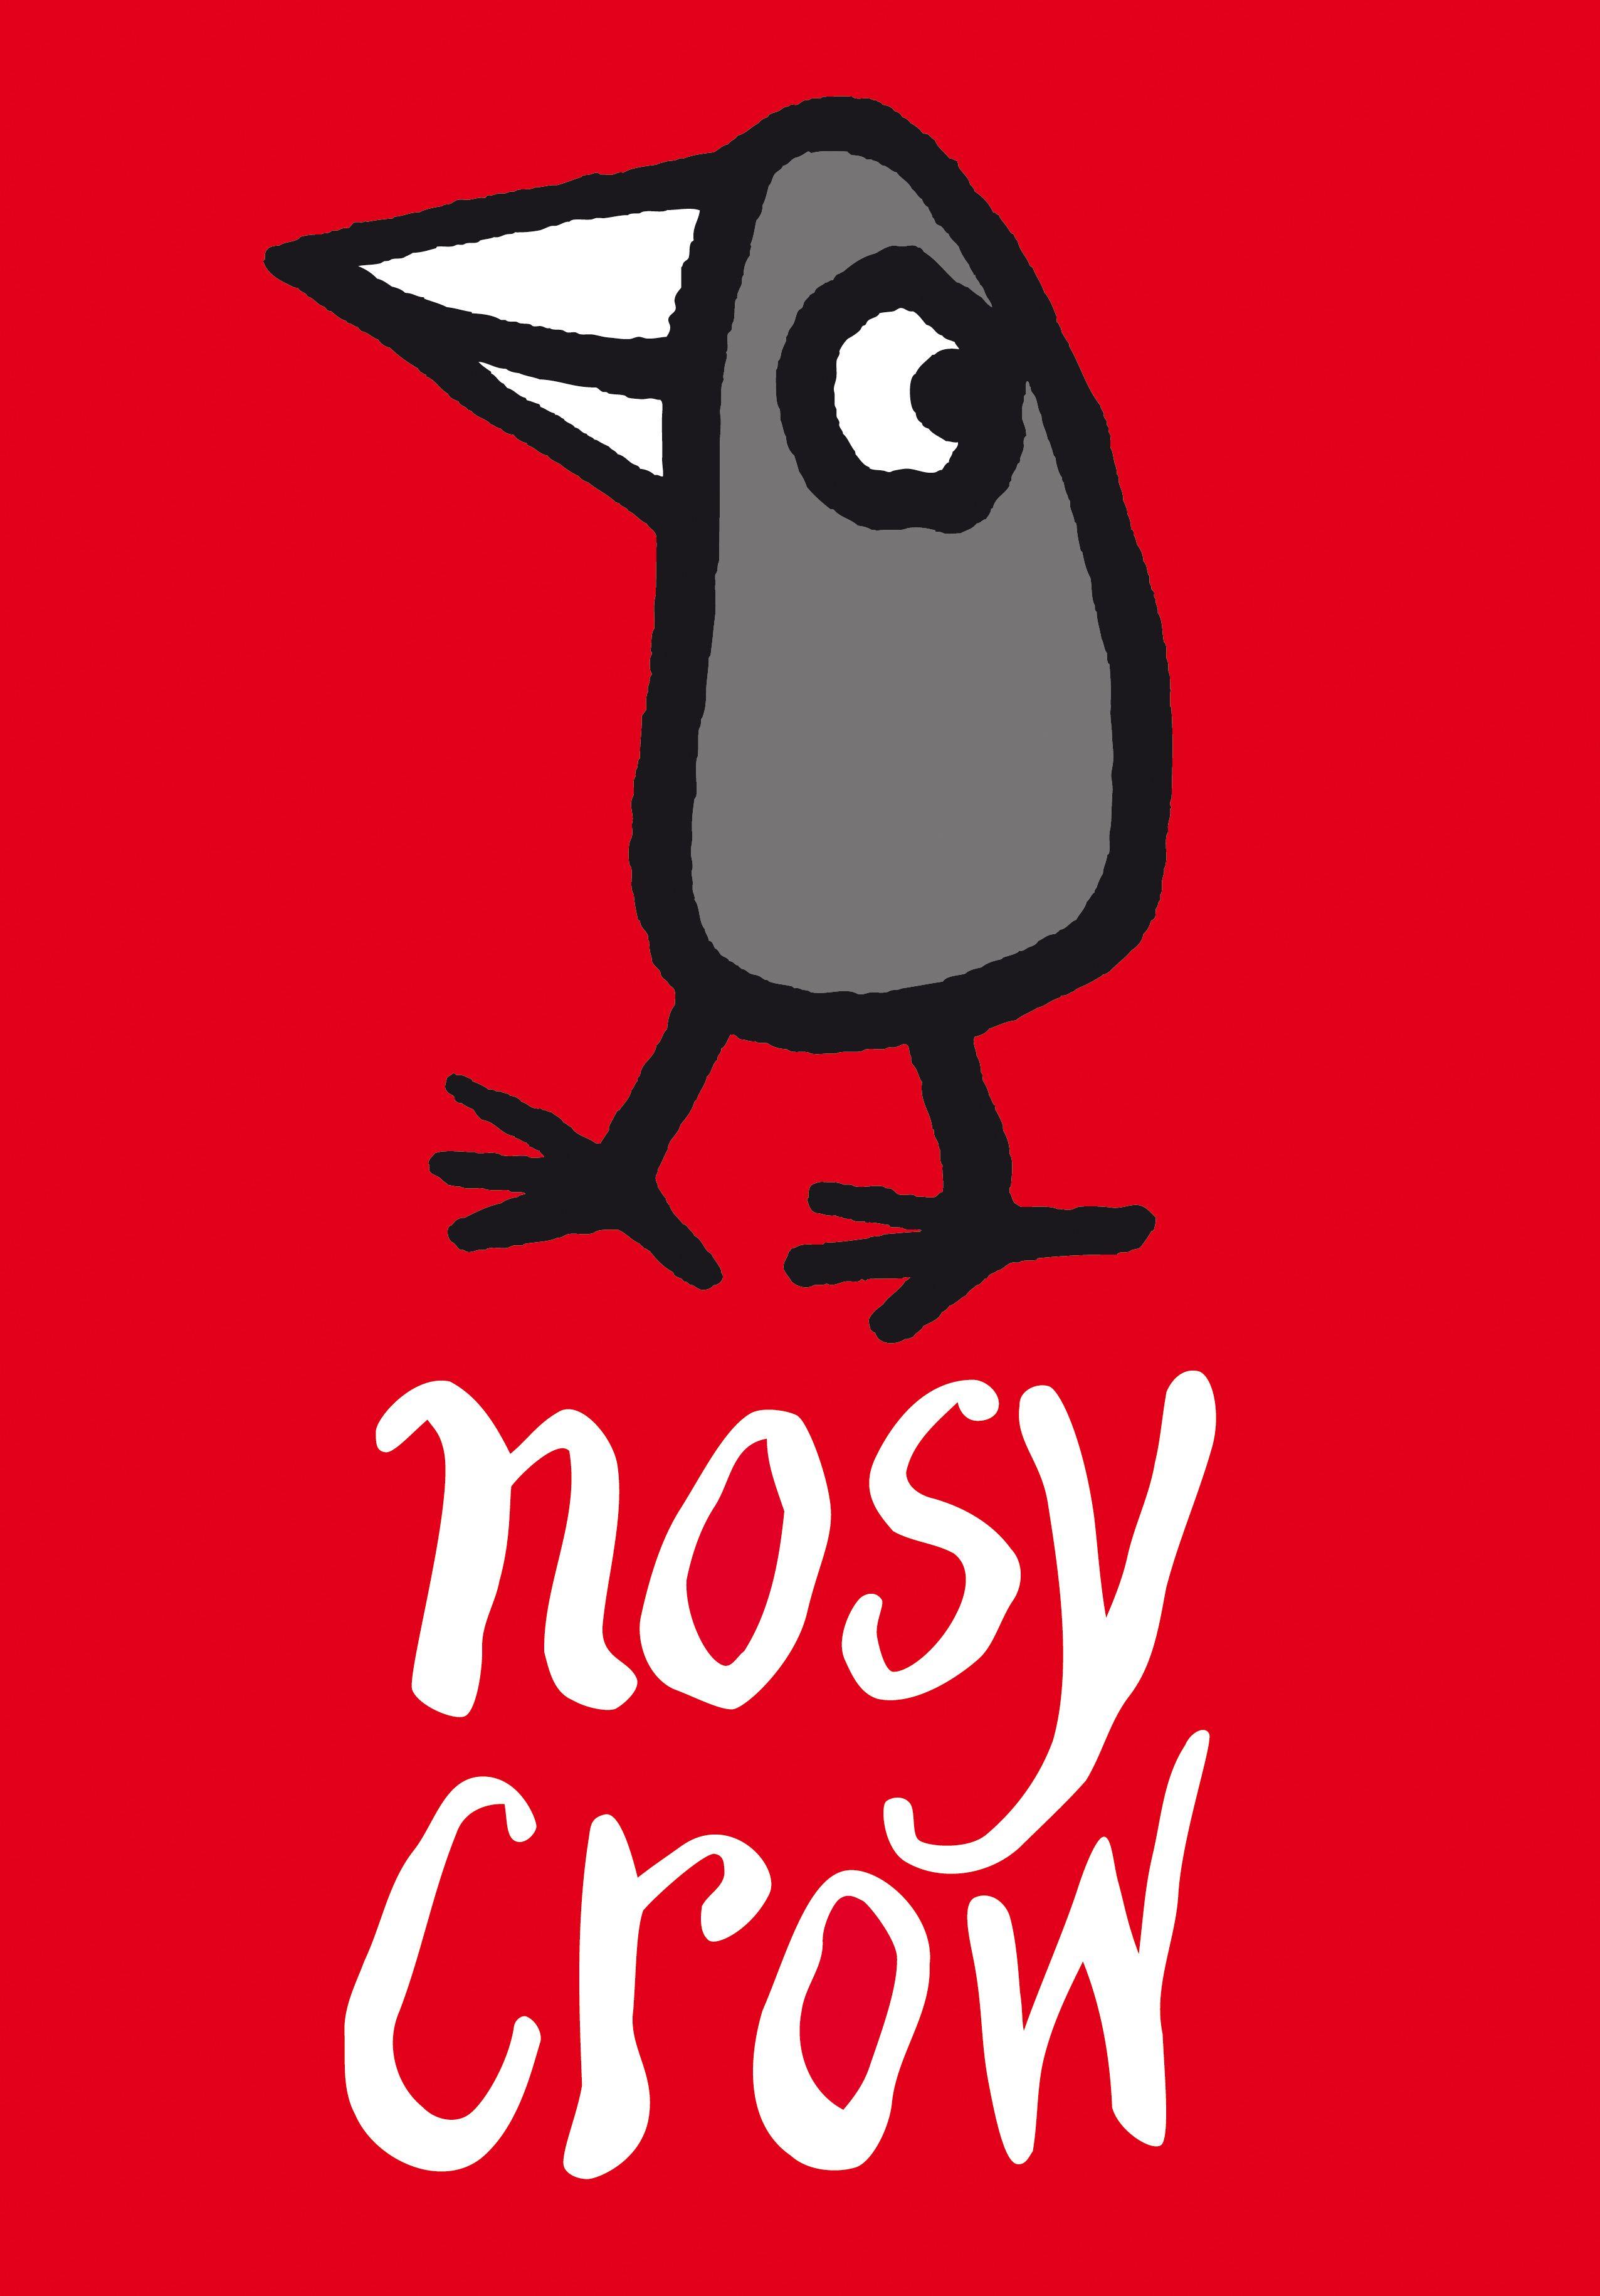 Red Crow Logo - Nosy Crow. Independent children's book and app publisher